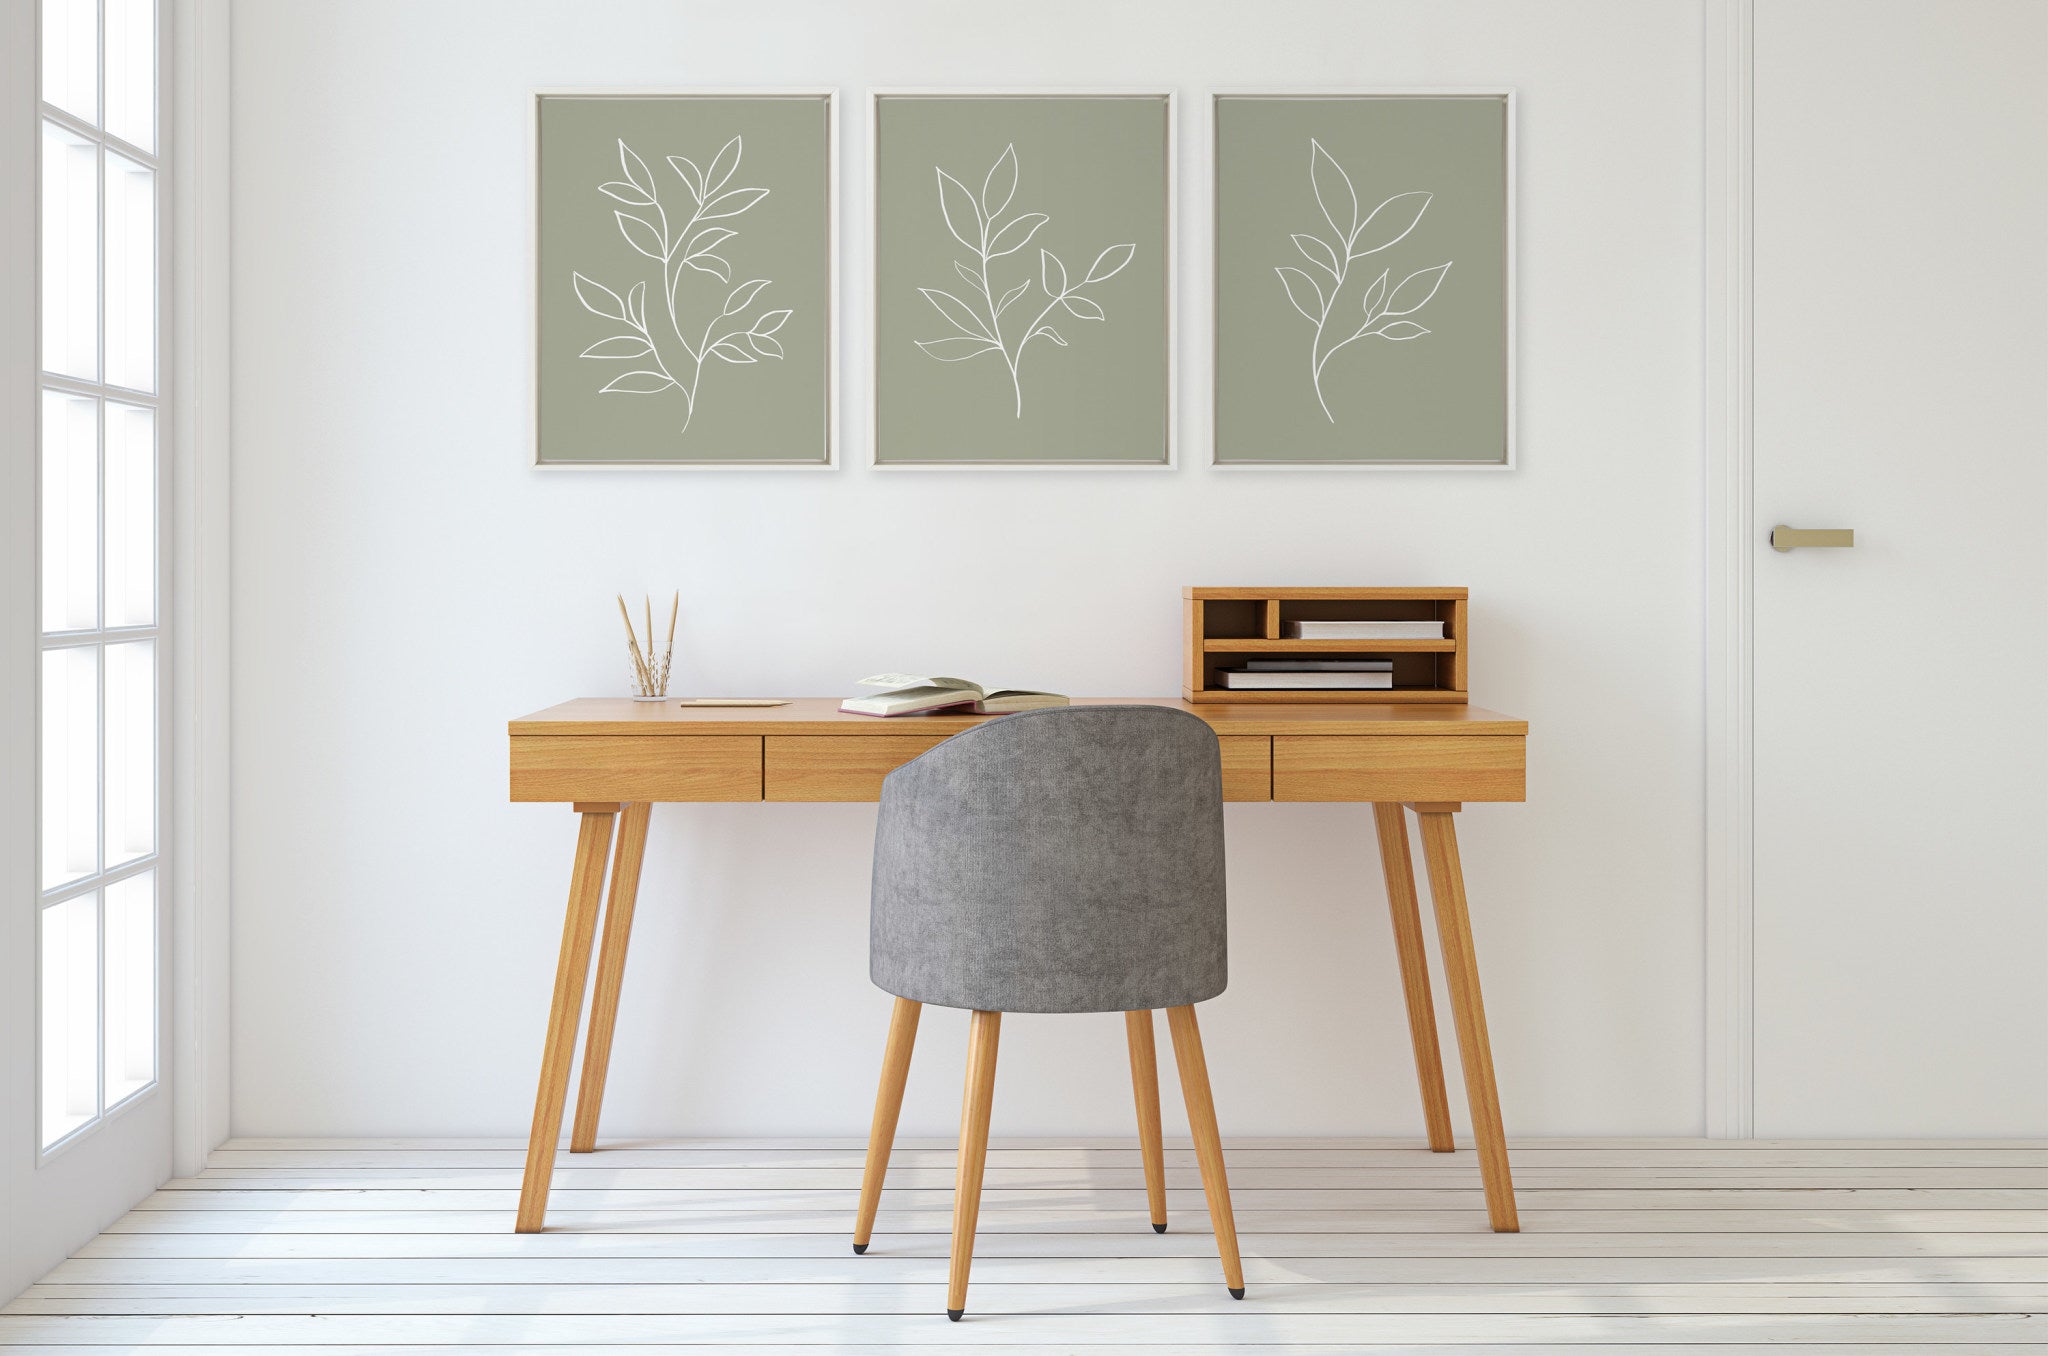 Sylvie Modern Sage Green Botanical Line Sketch Print 1, 2 and 3 Framed Canvas by The Creative Bunch Studio